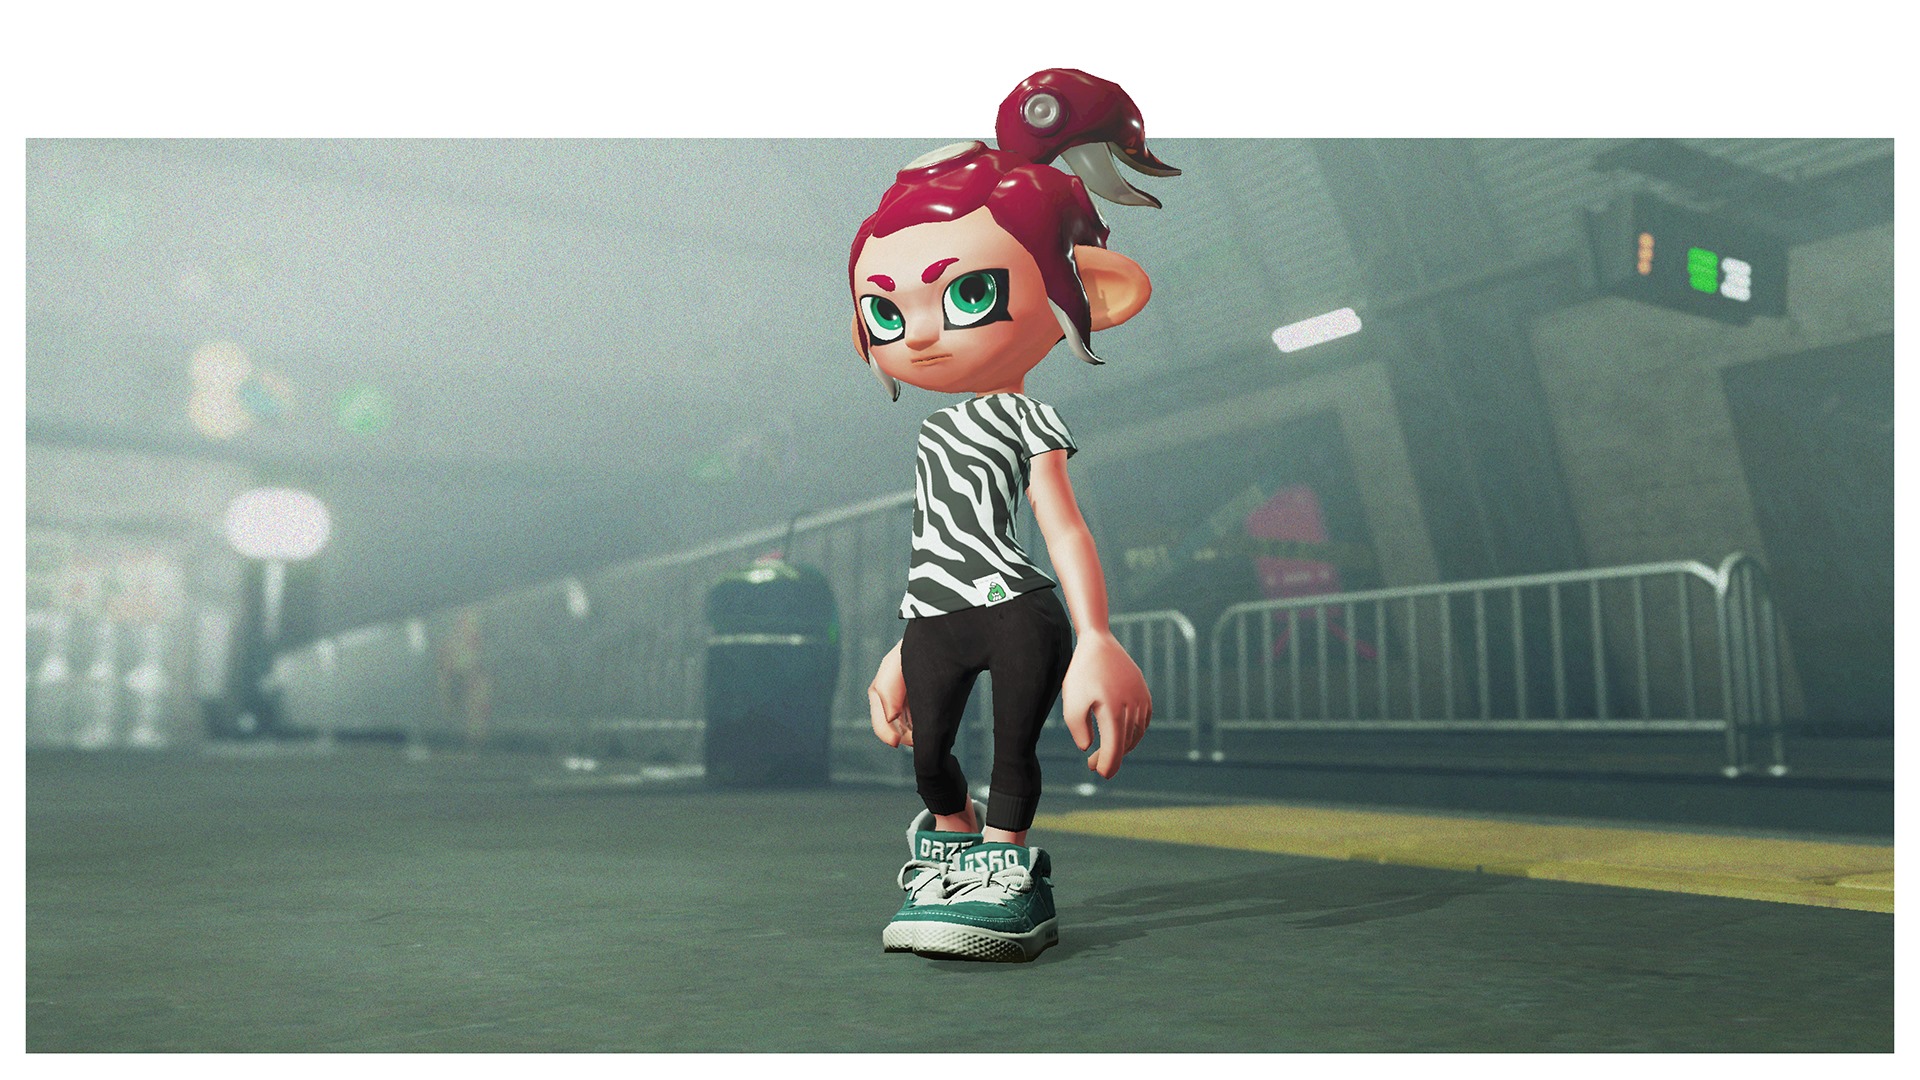 Octo Expansion Octoling Hairstyles Promo Image2.jpg. 